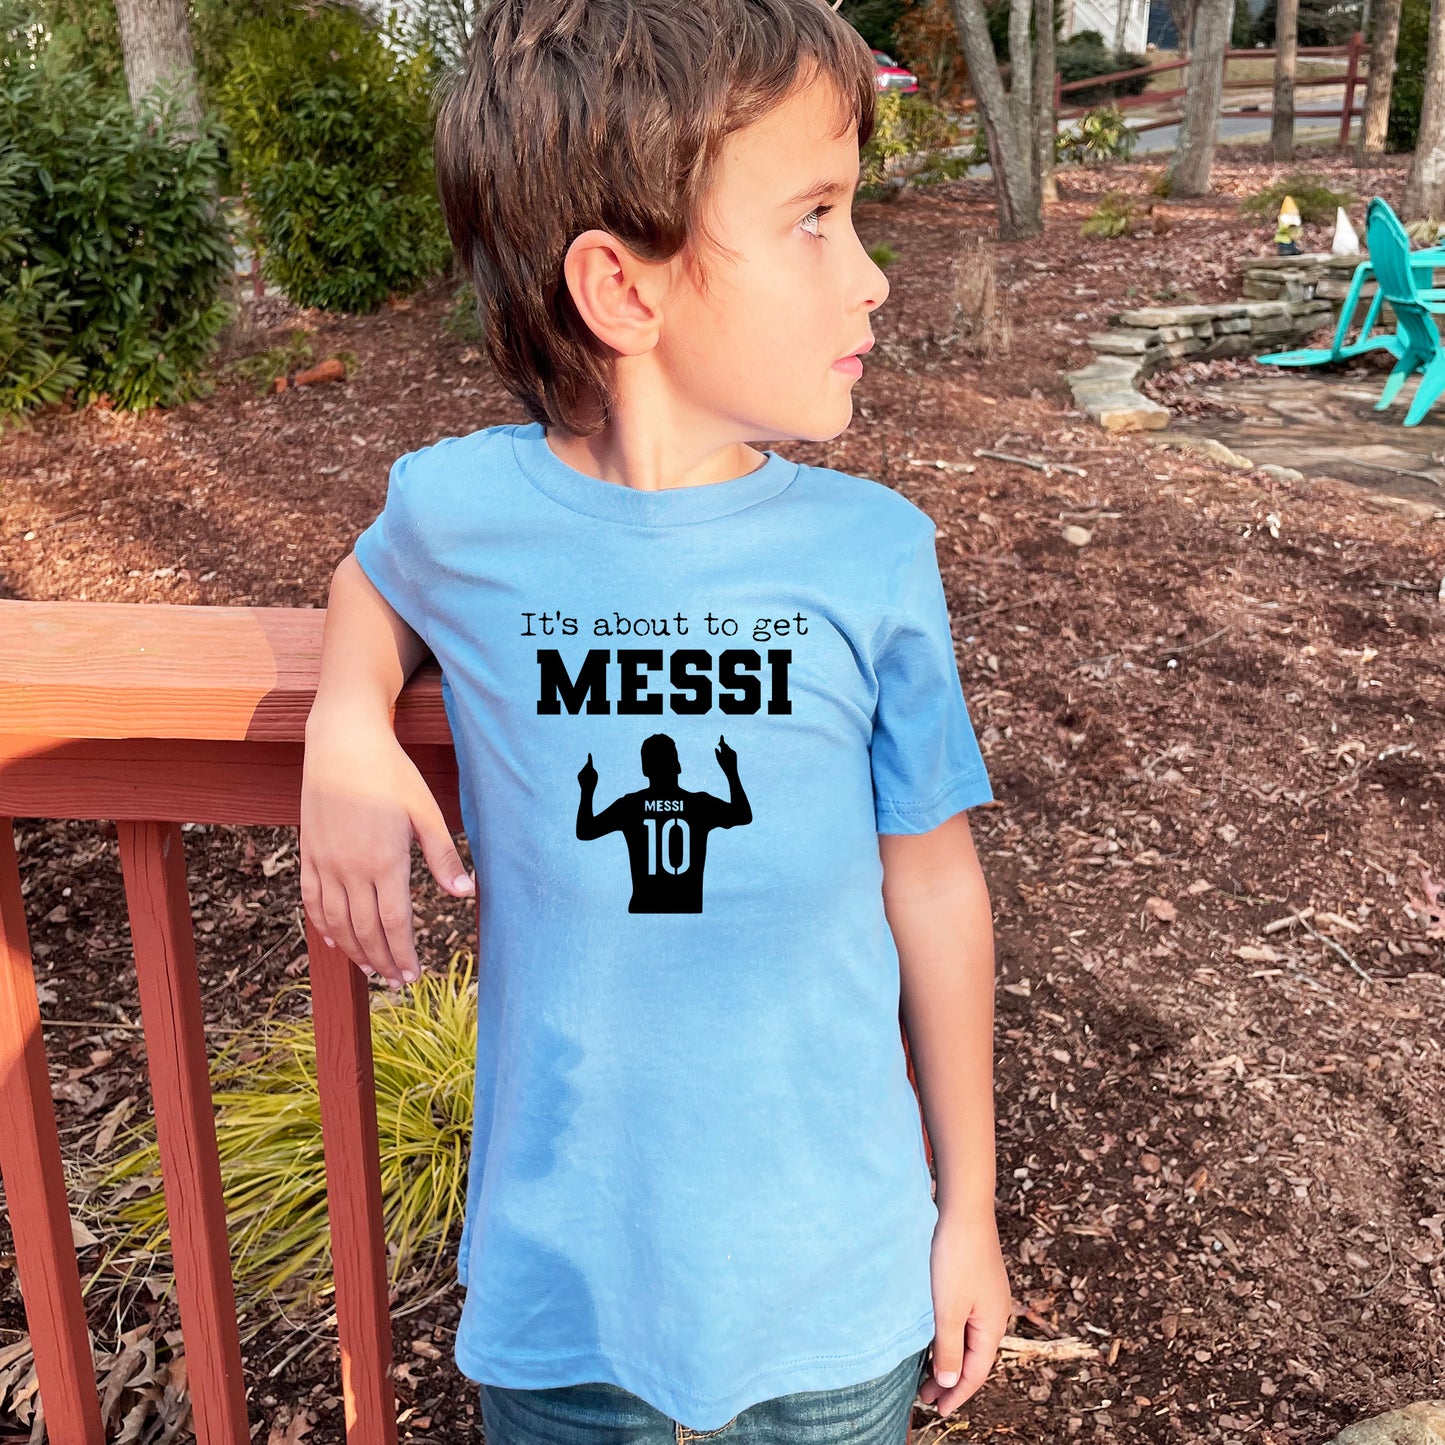 It's About To Get Messi (Soccer) - Kid's Tee - Columbia Blue or Lavender